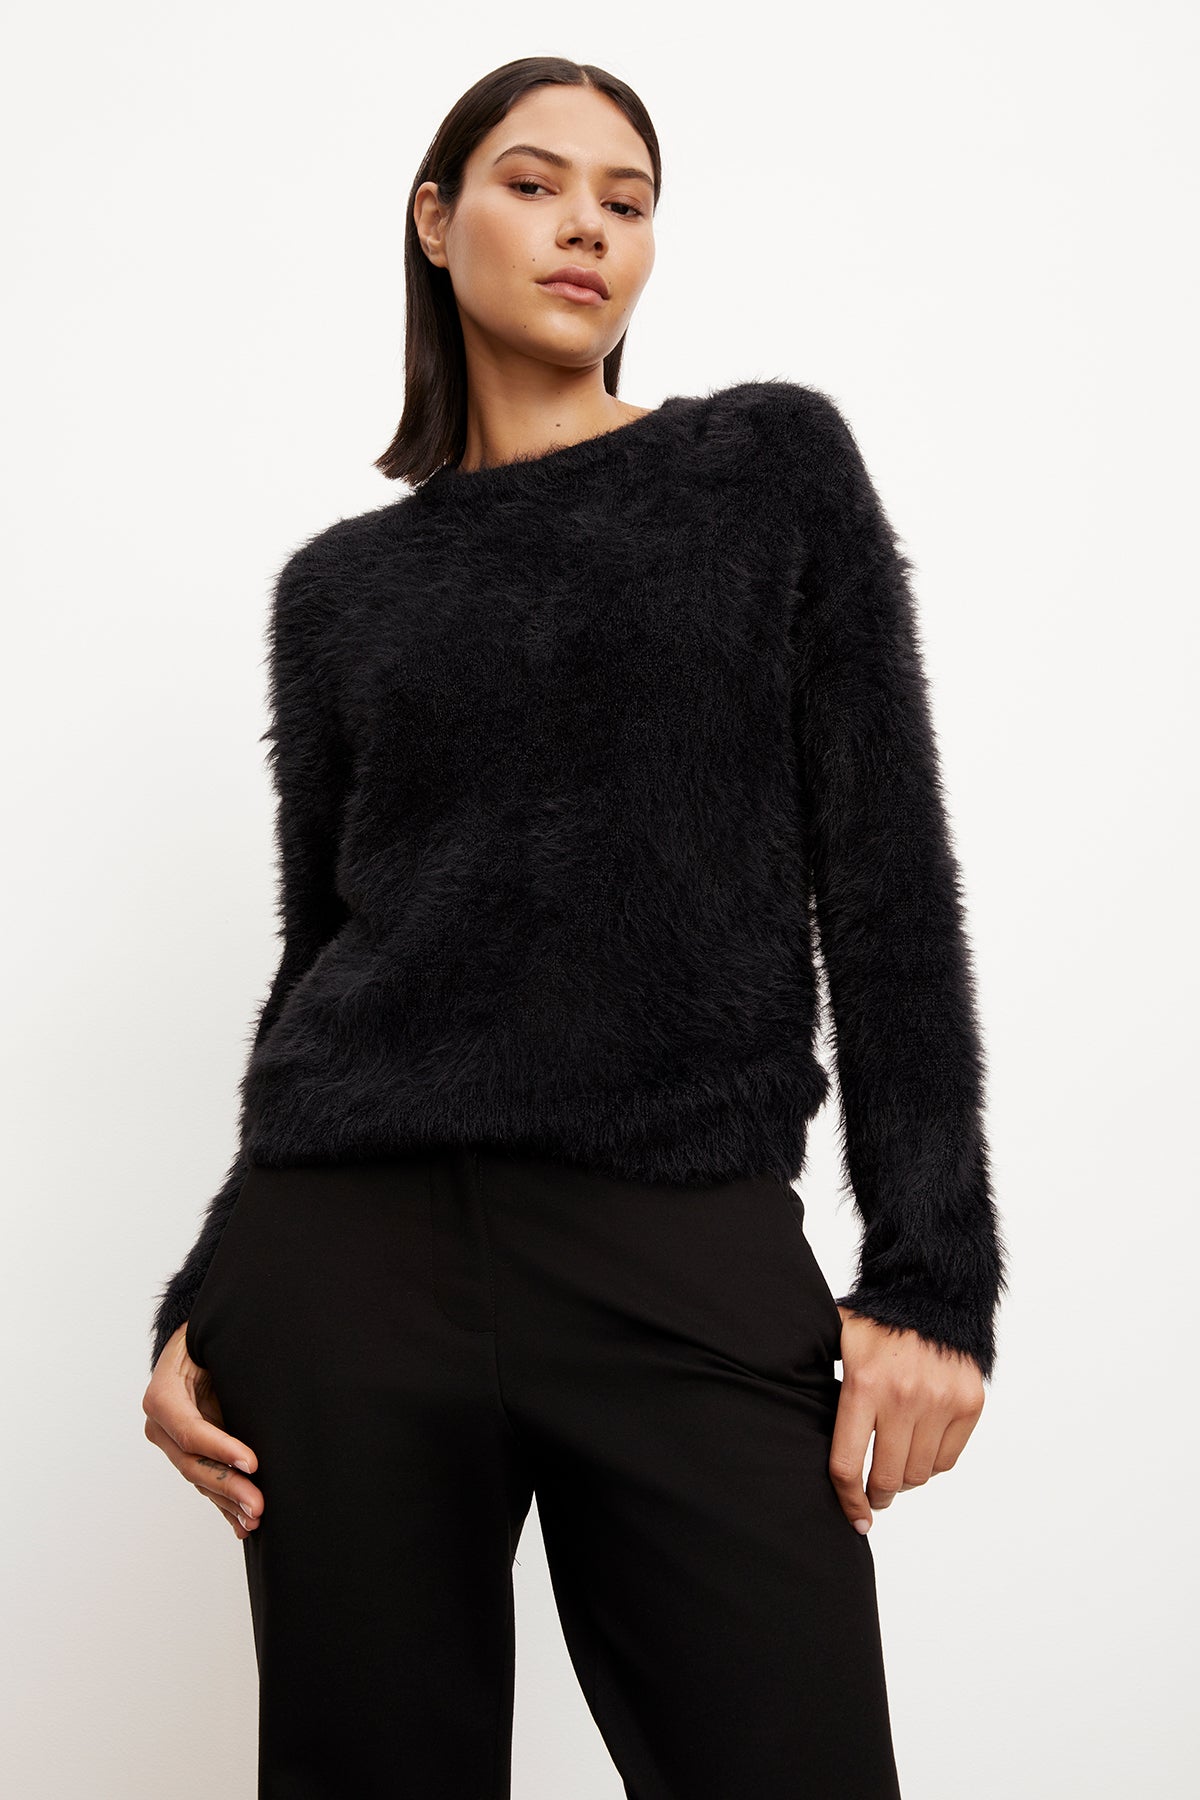 The model is wearing a Velvet by Graham & Spencer RAY FEATHER YARN CREW NECK SWEATER.-35572015562945